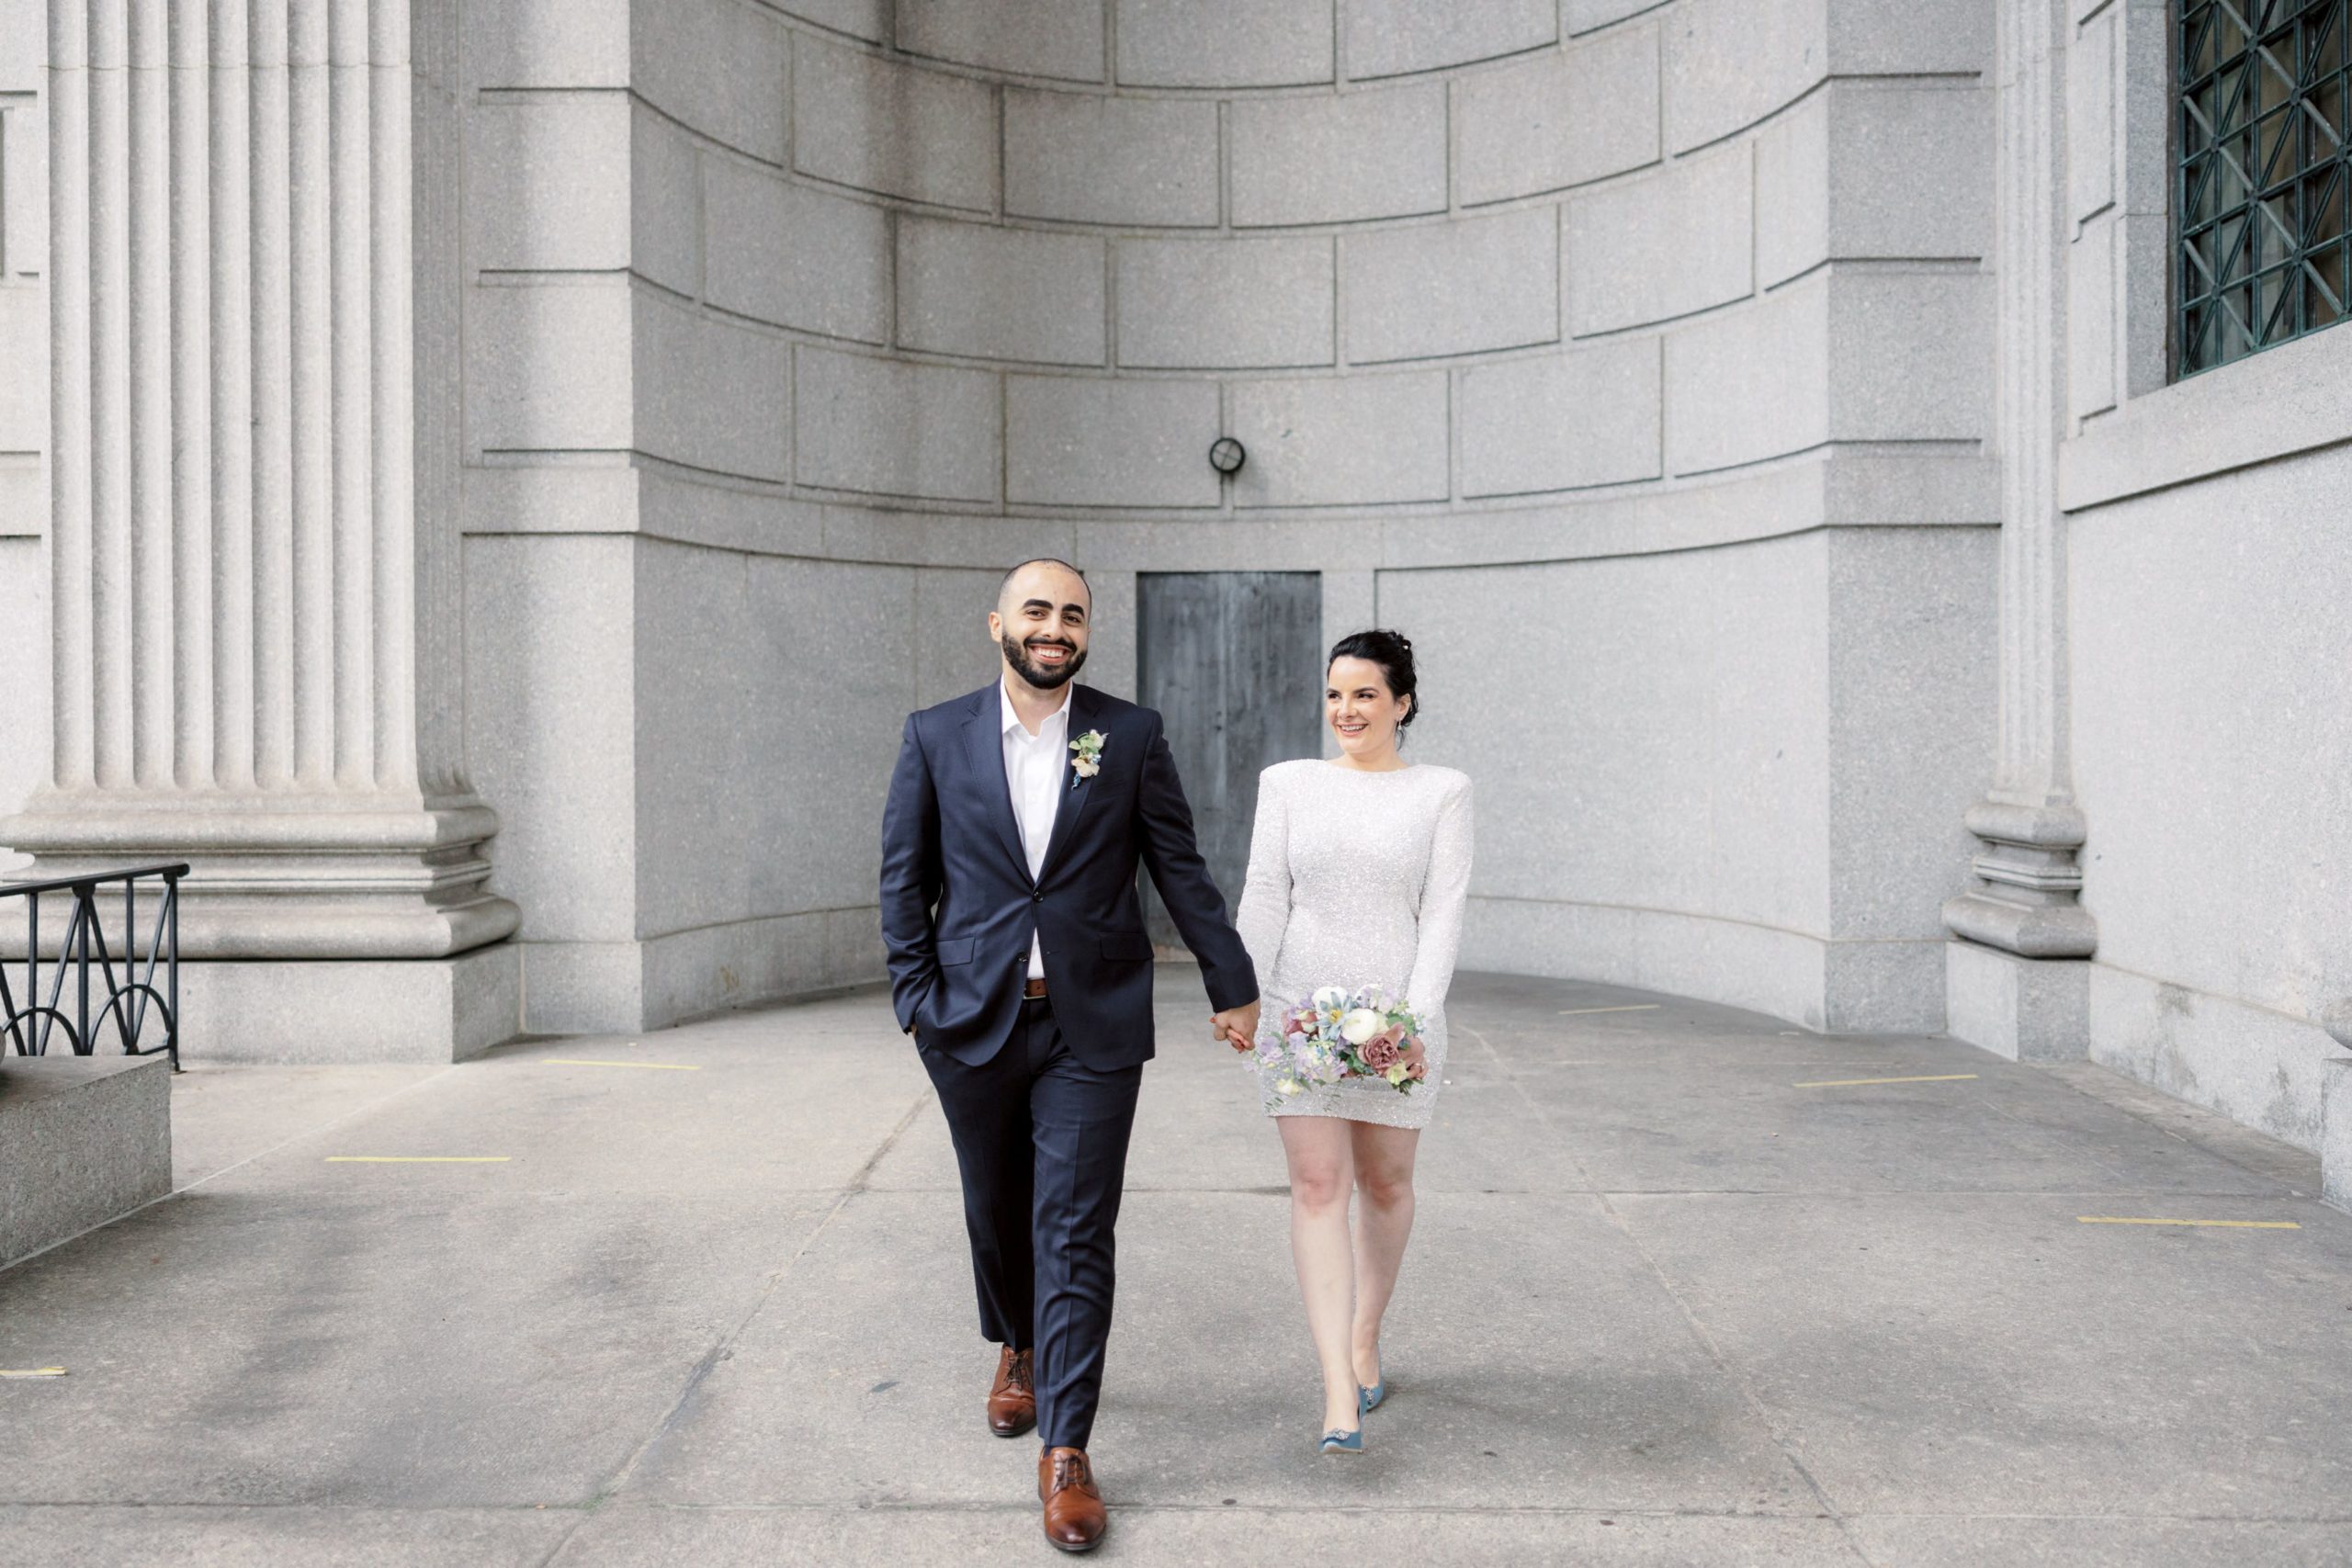 The bride and groom are walking happily. Image by Jenny Fu Studio NYC